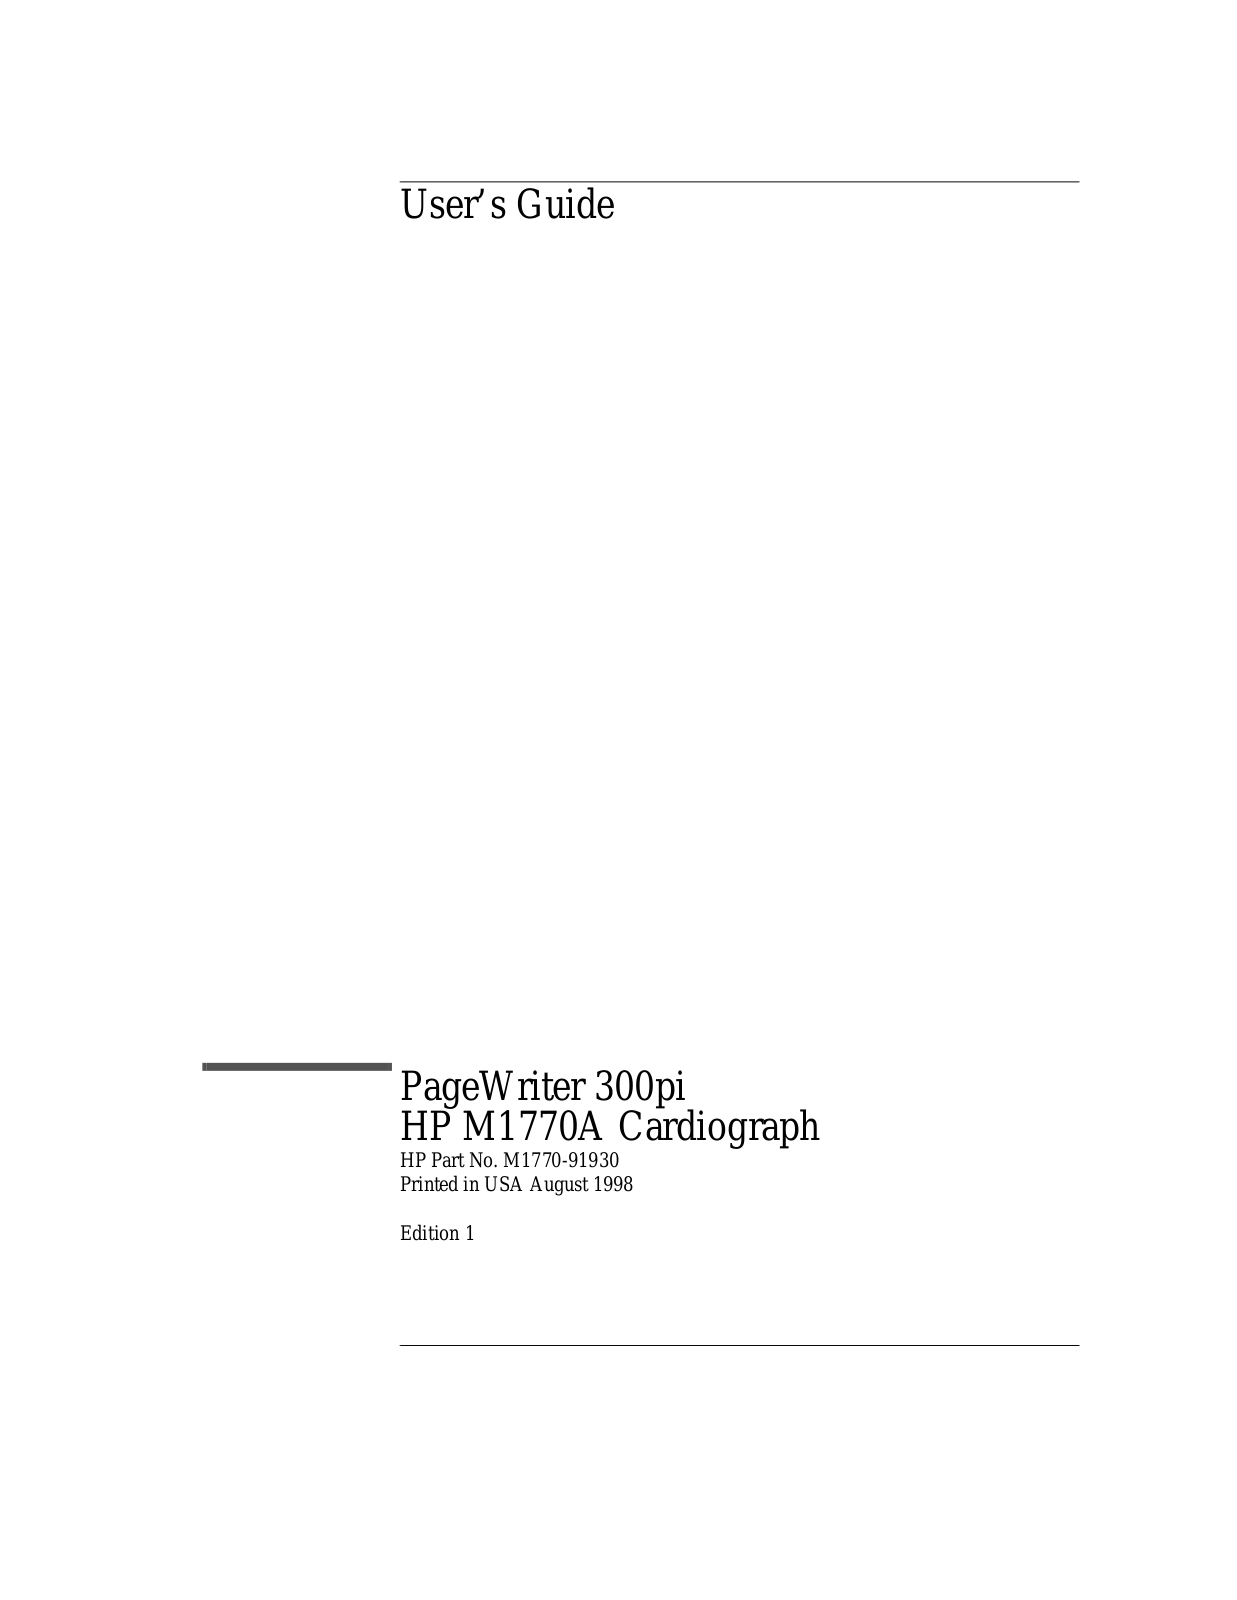 Philips PageWriter 300pi User guide